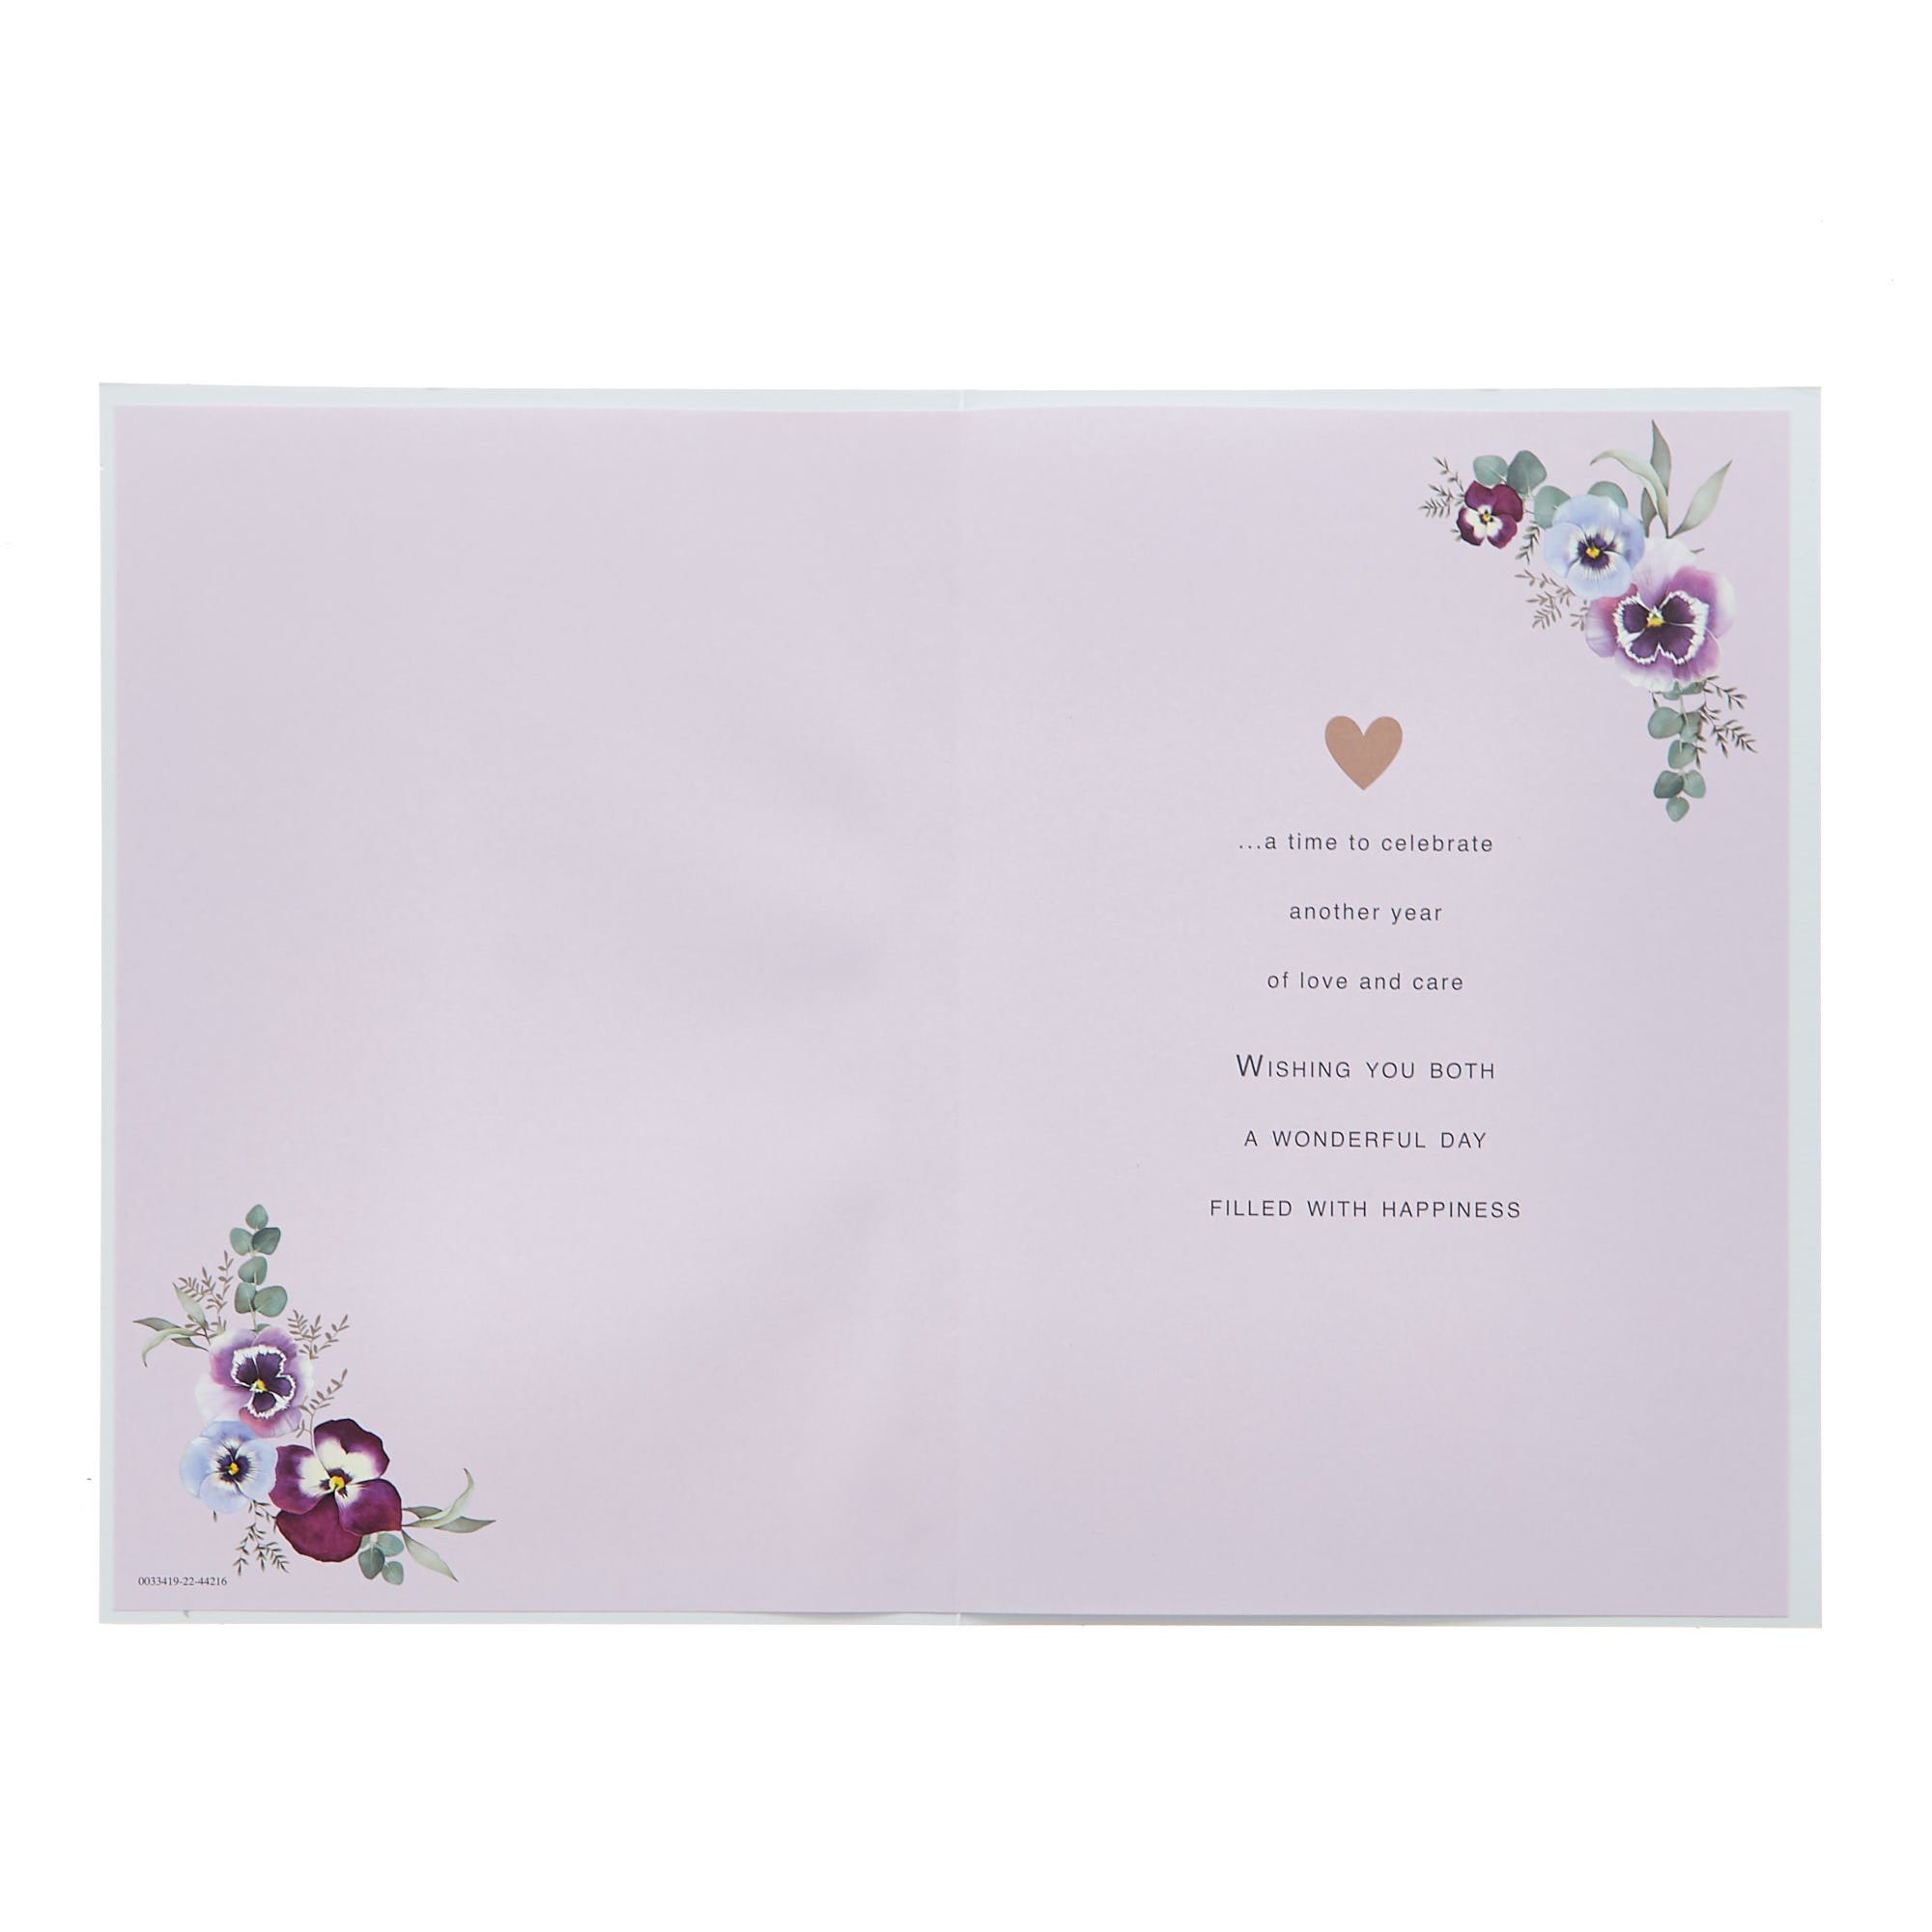 Wedding Anniversary Card - Two Hearts To Share